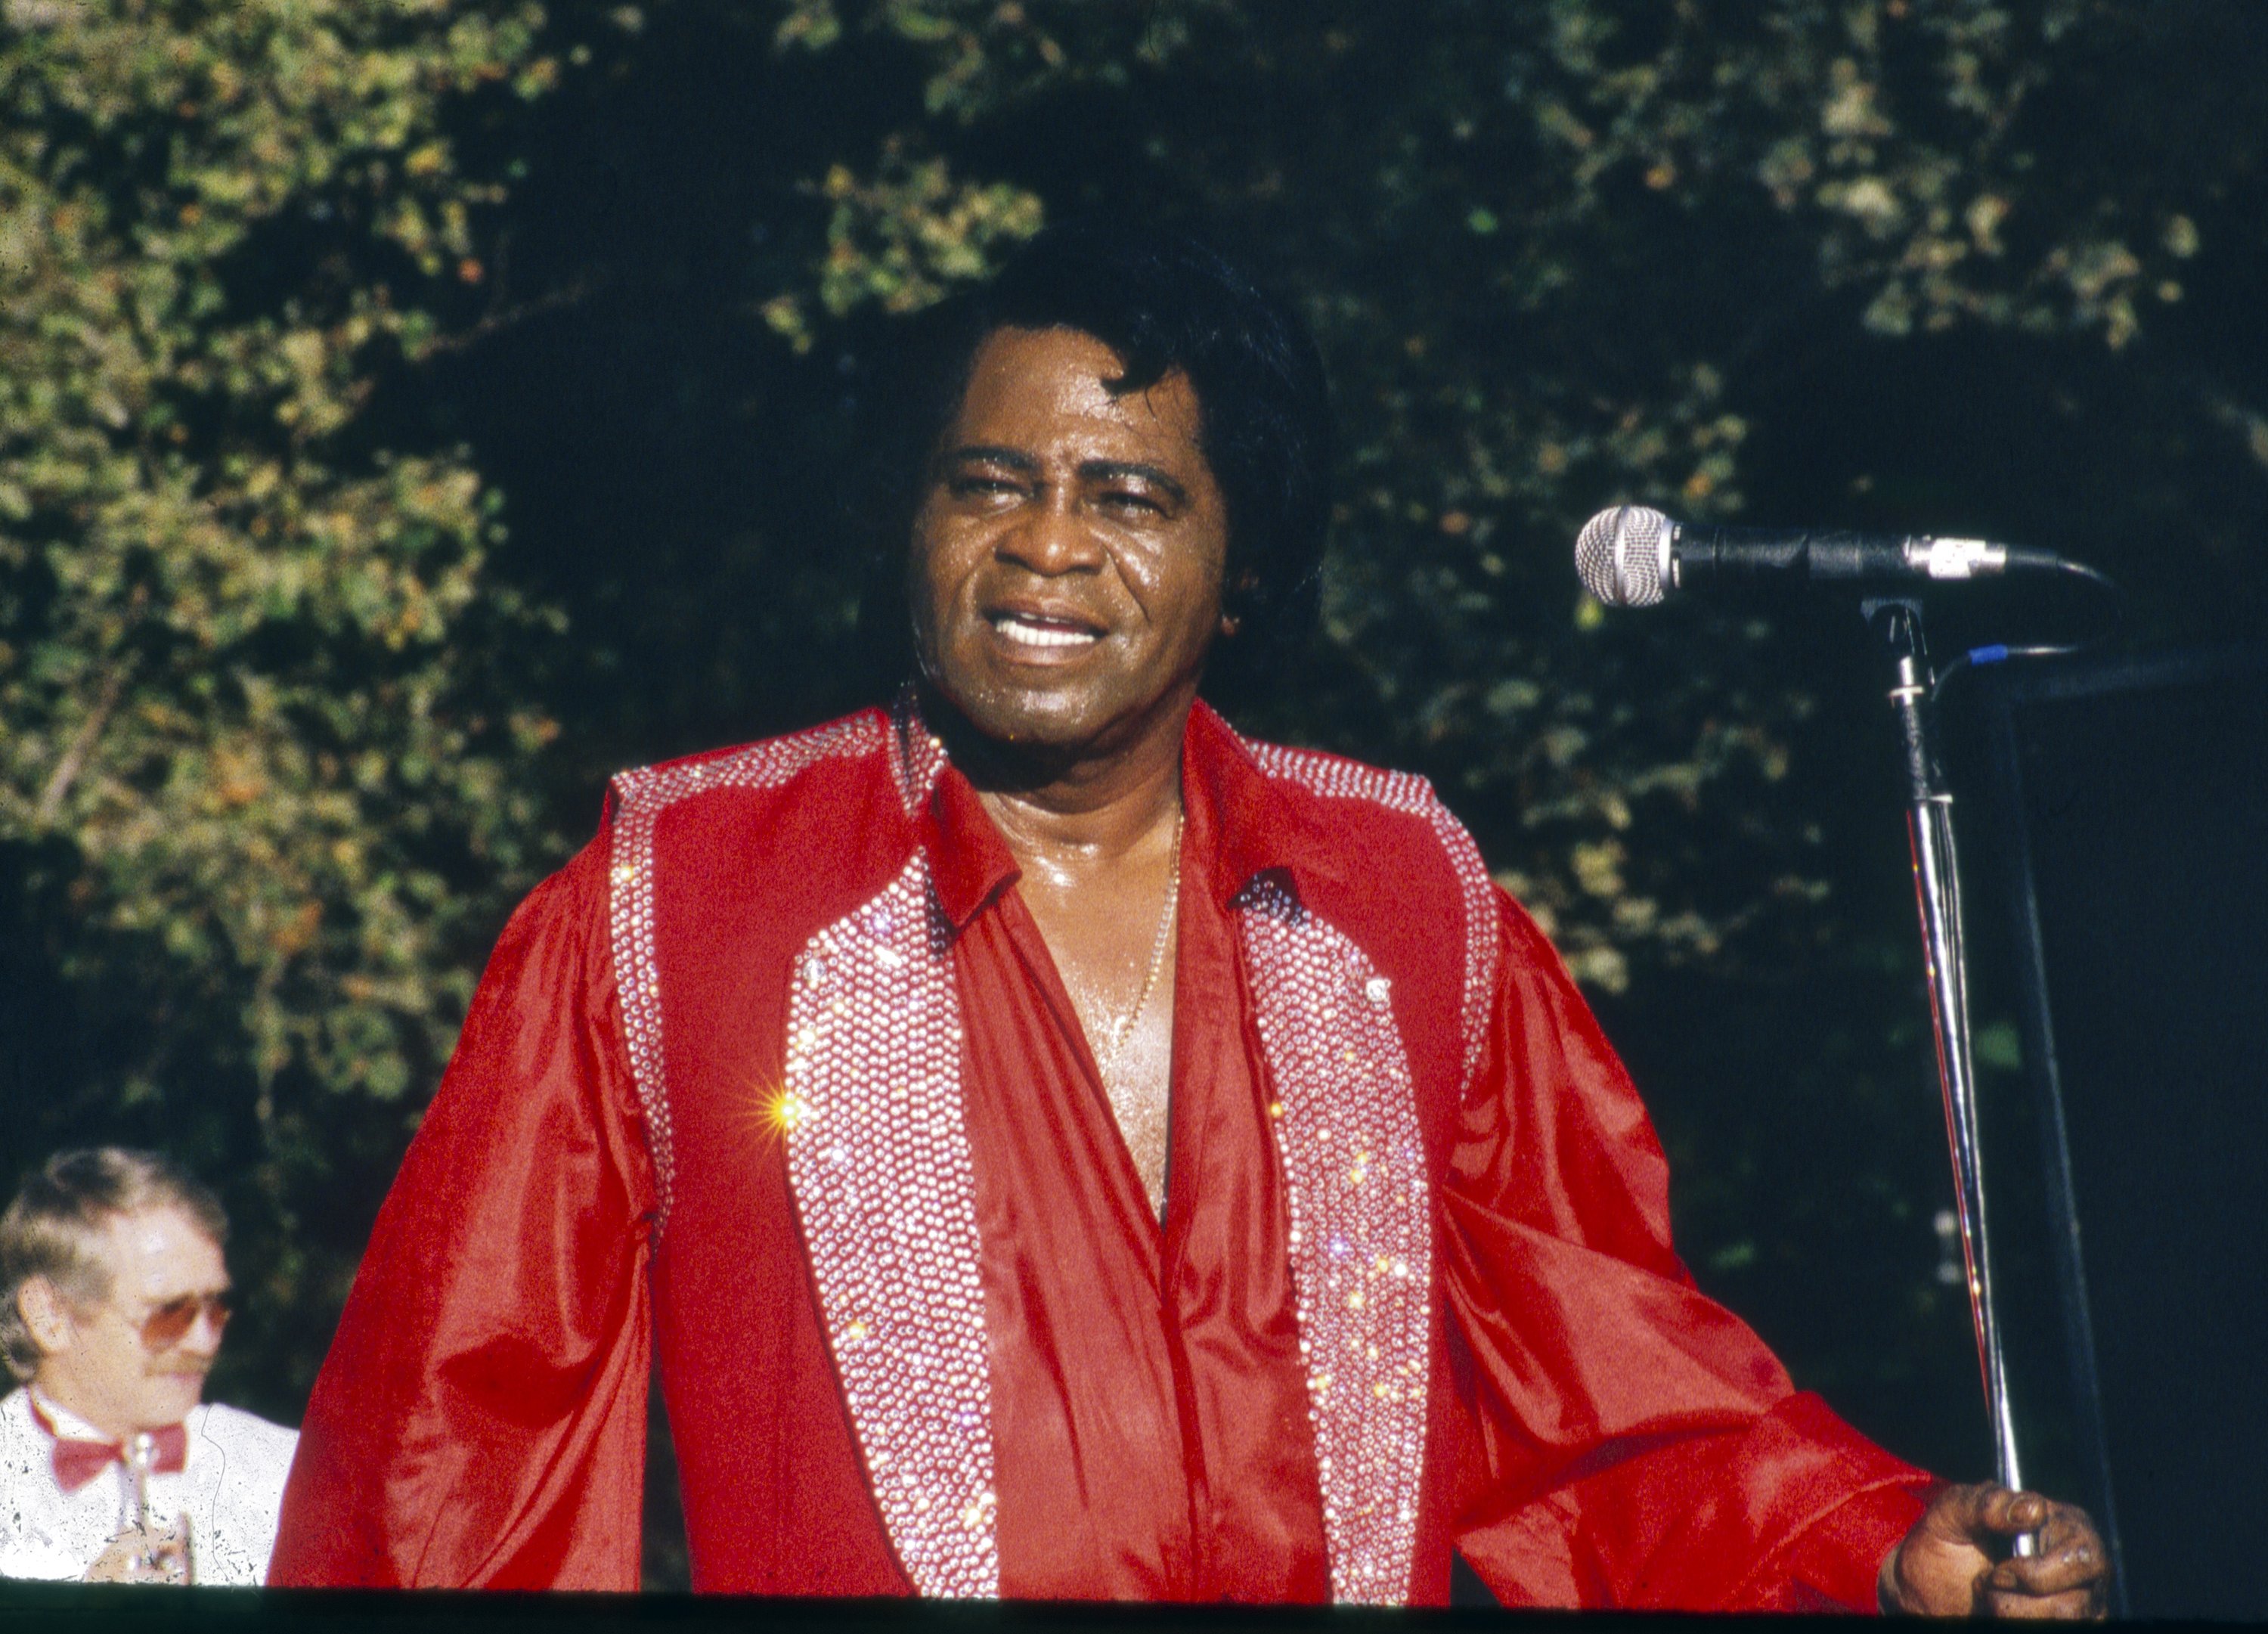 James Brown performing at the Central Park Summerstage Concert series on July 12, 1997, in New York City | Source: Getty Images